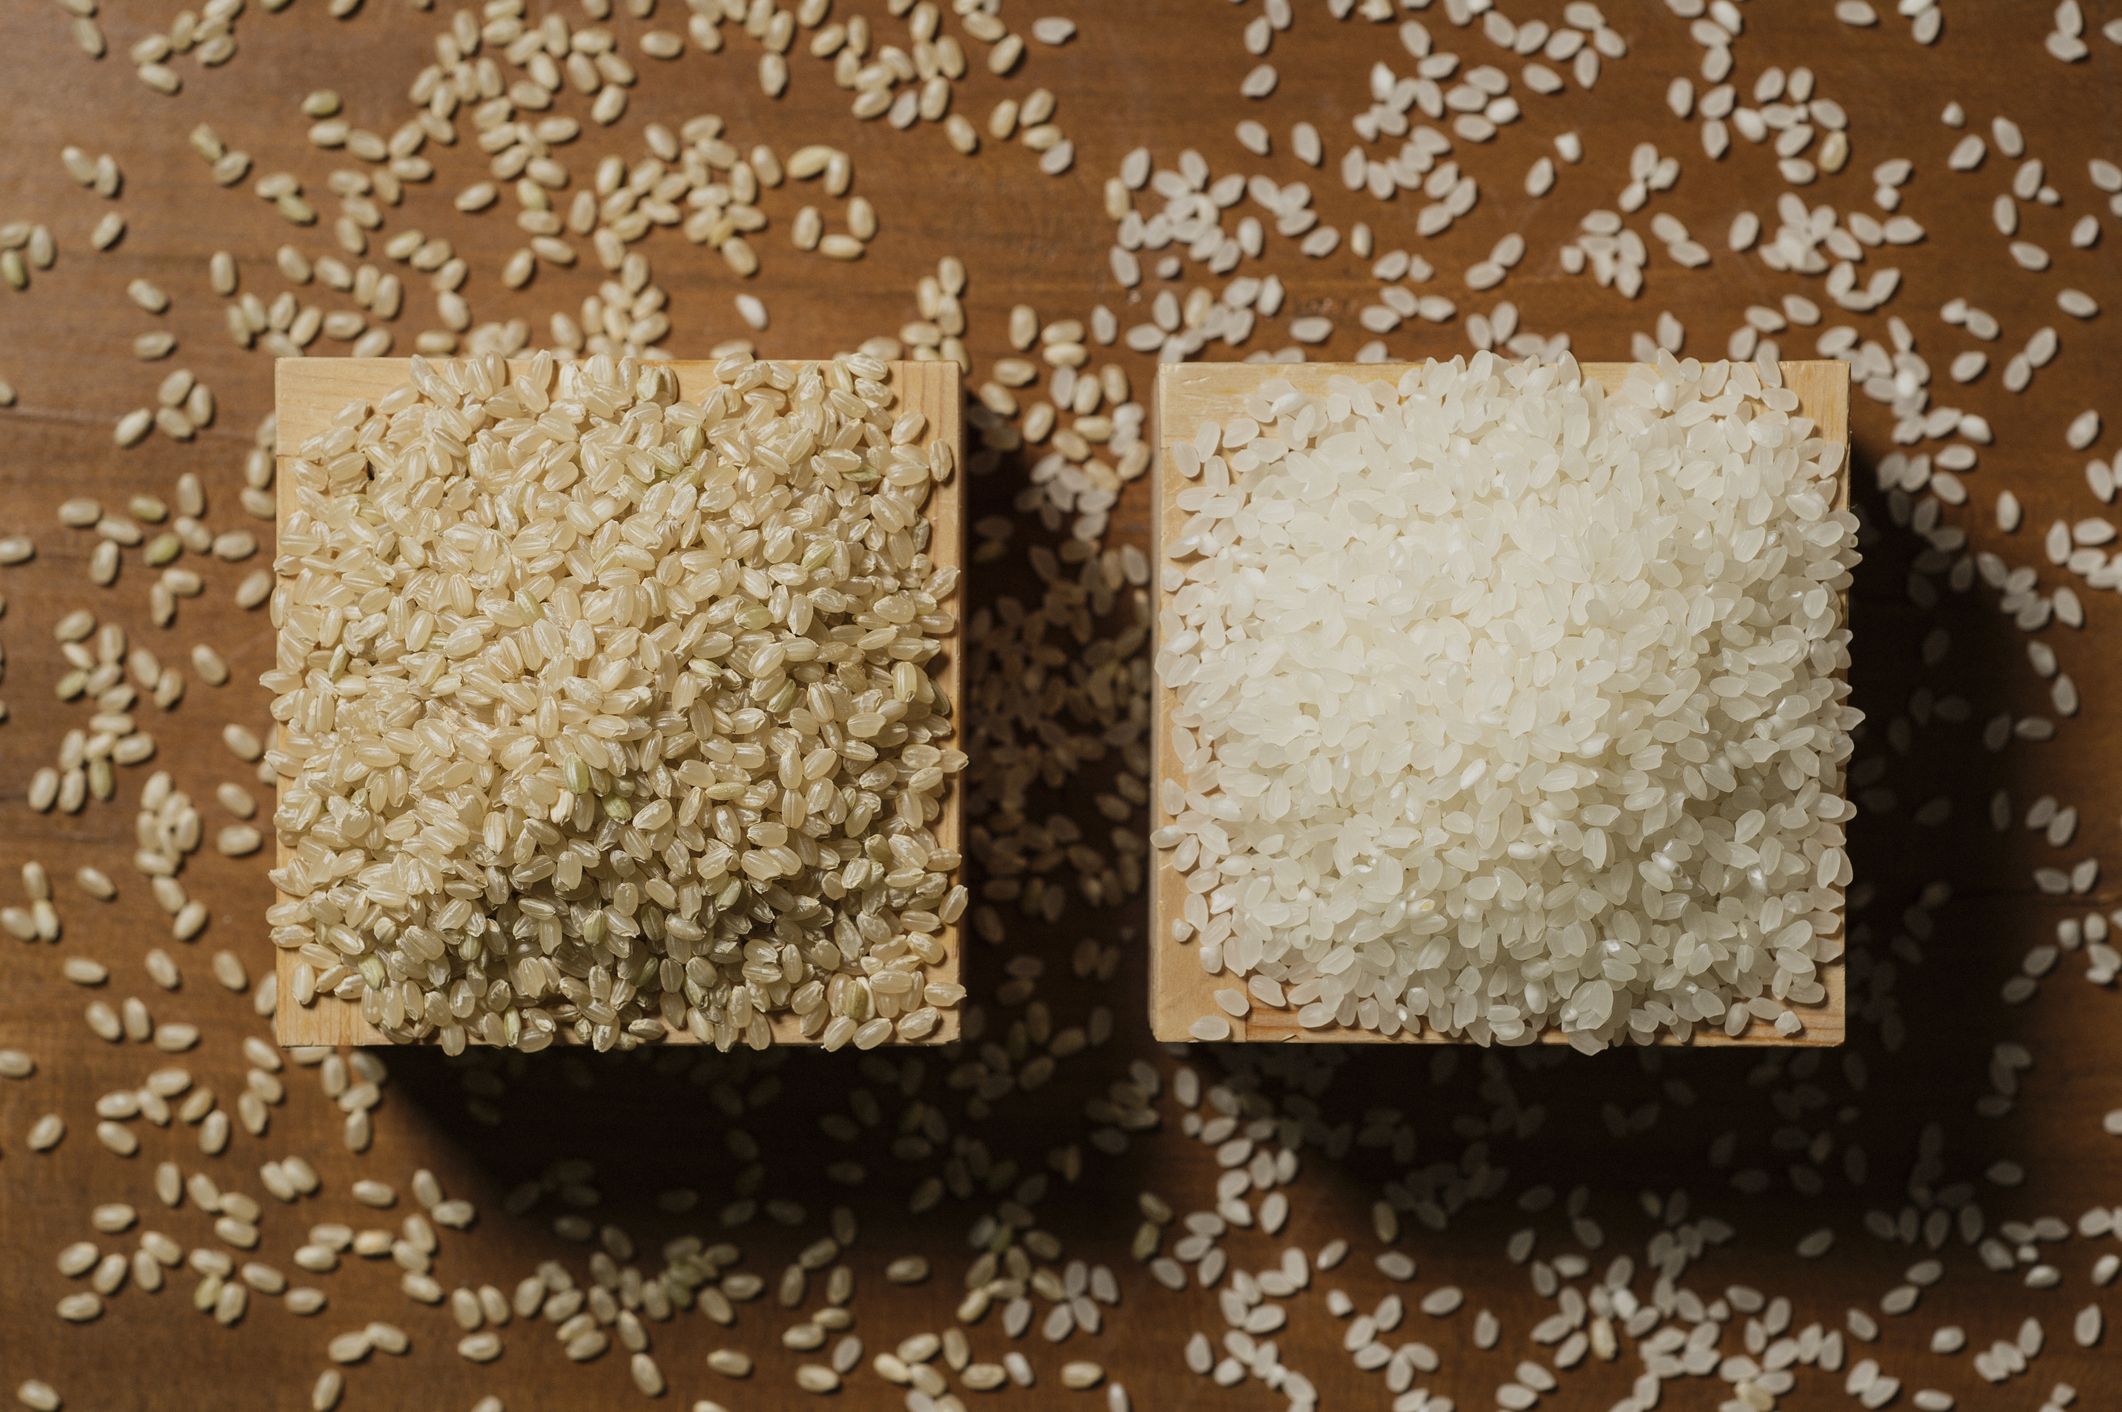 Rice vs. Pasta: Which Is Healthier?